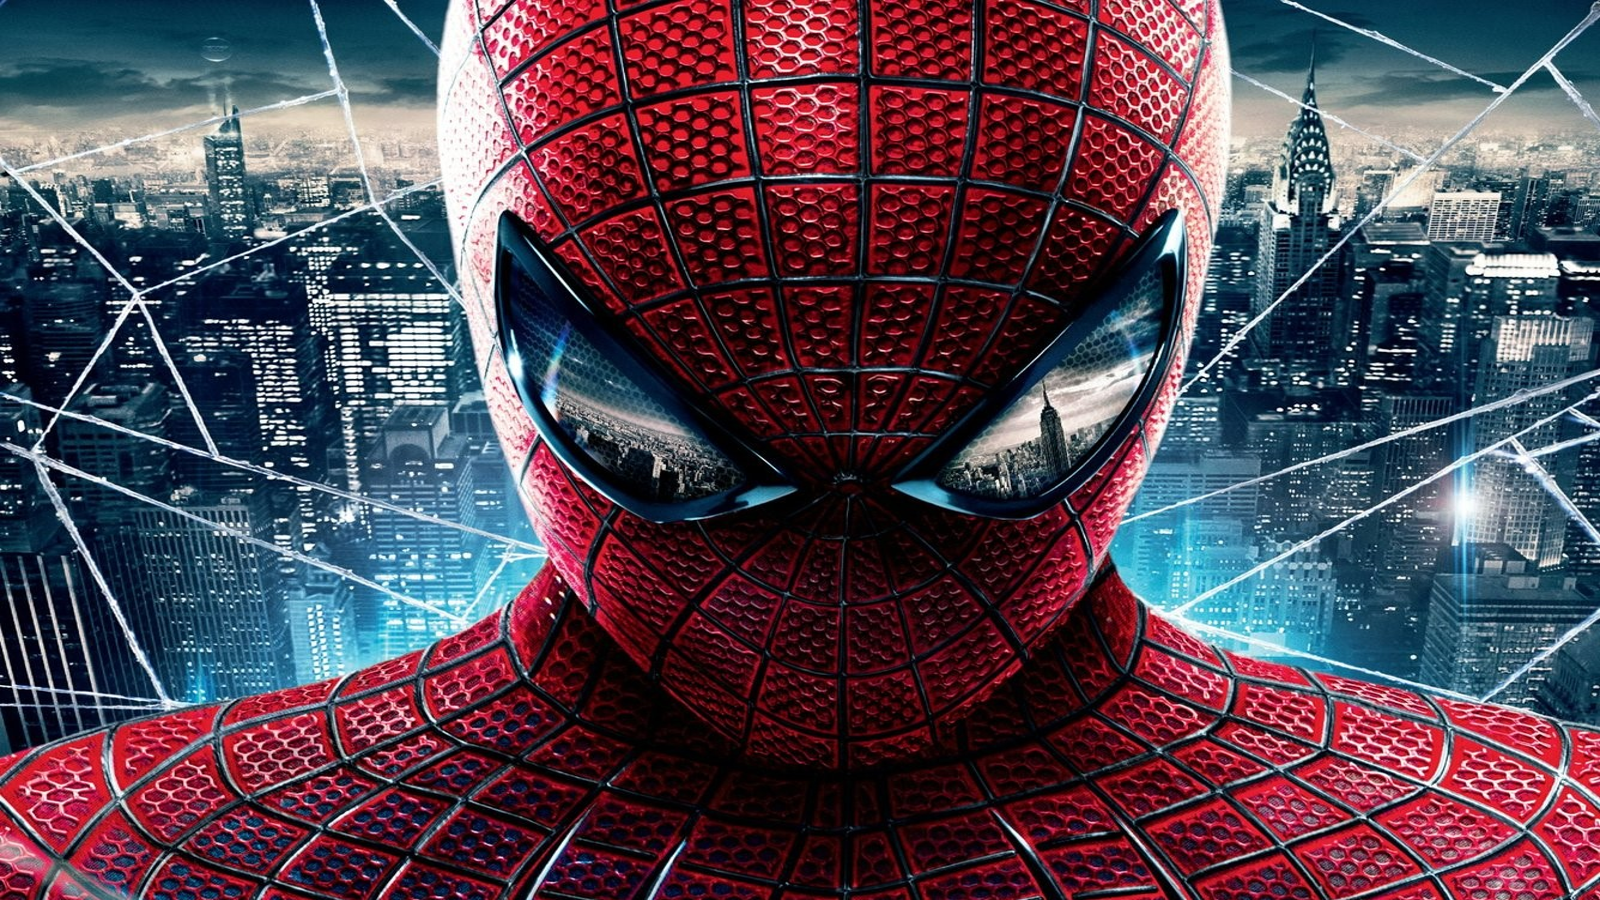 The Amazing Spider-Man 2 - Eurogamer Let's Play LIVE 